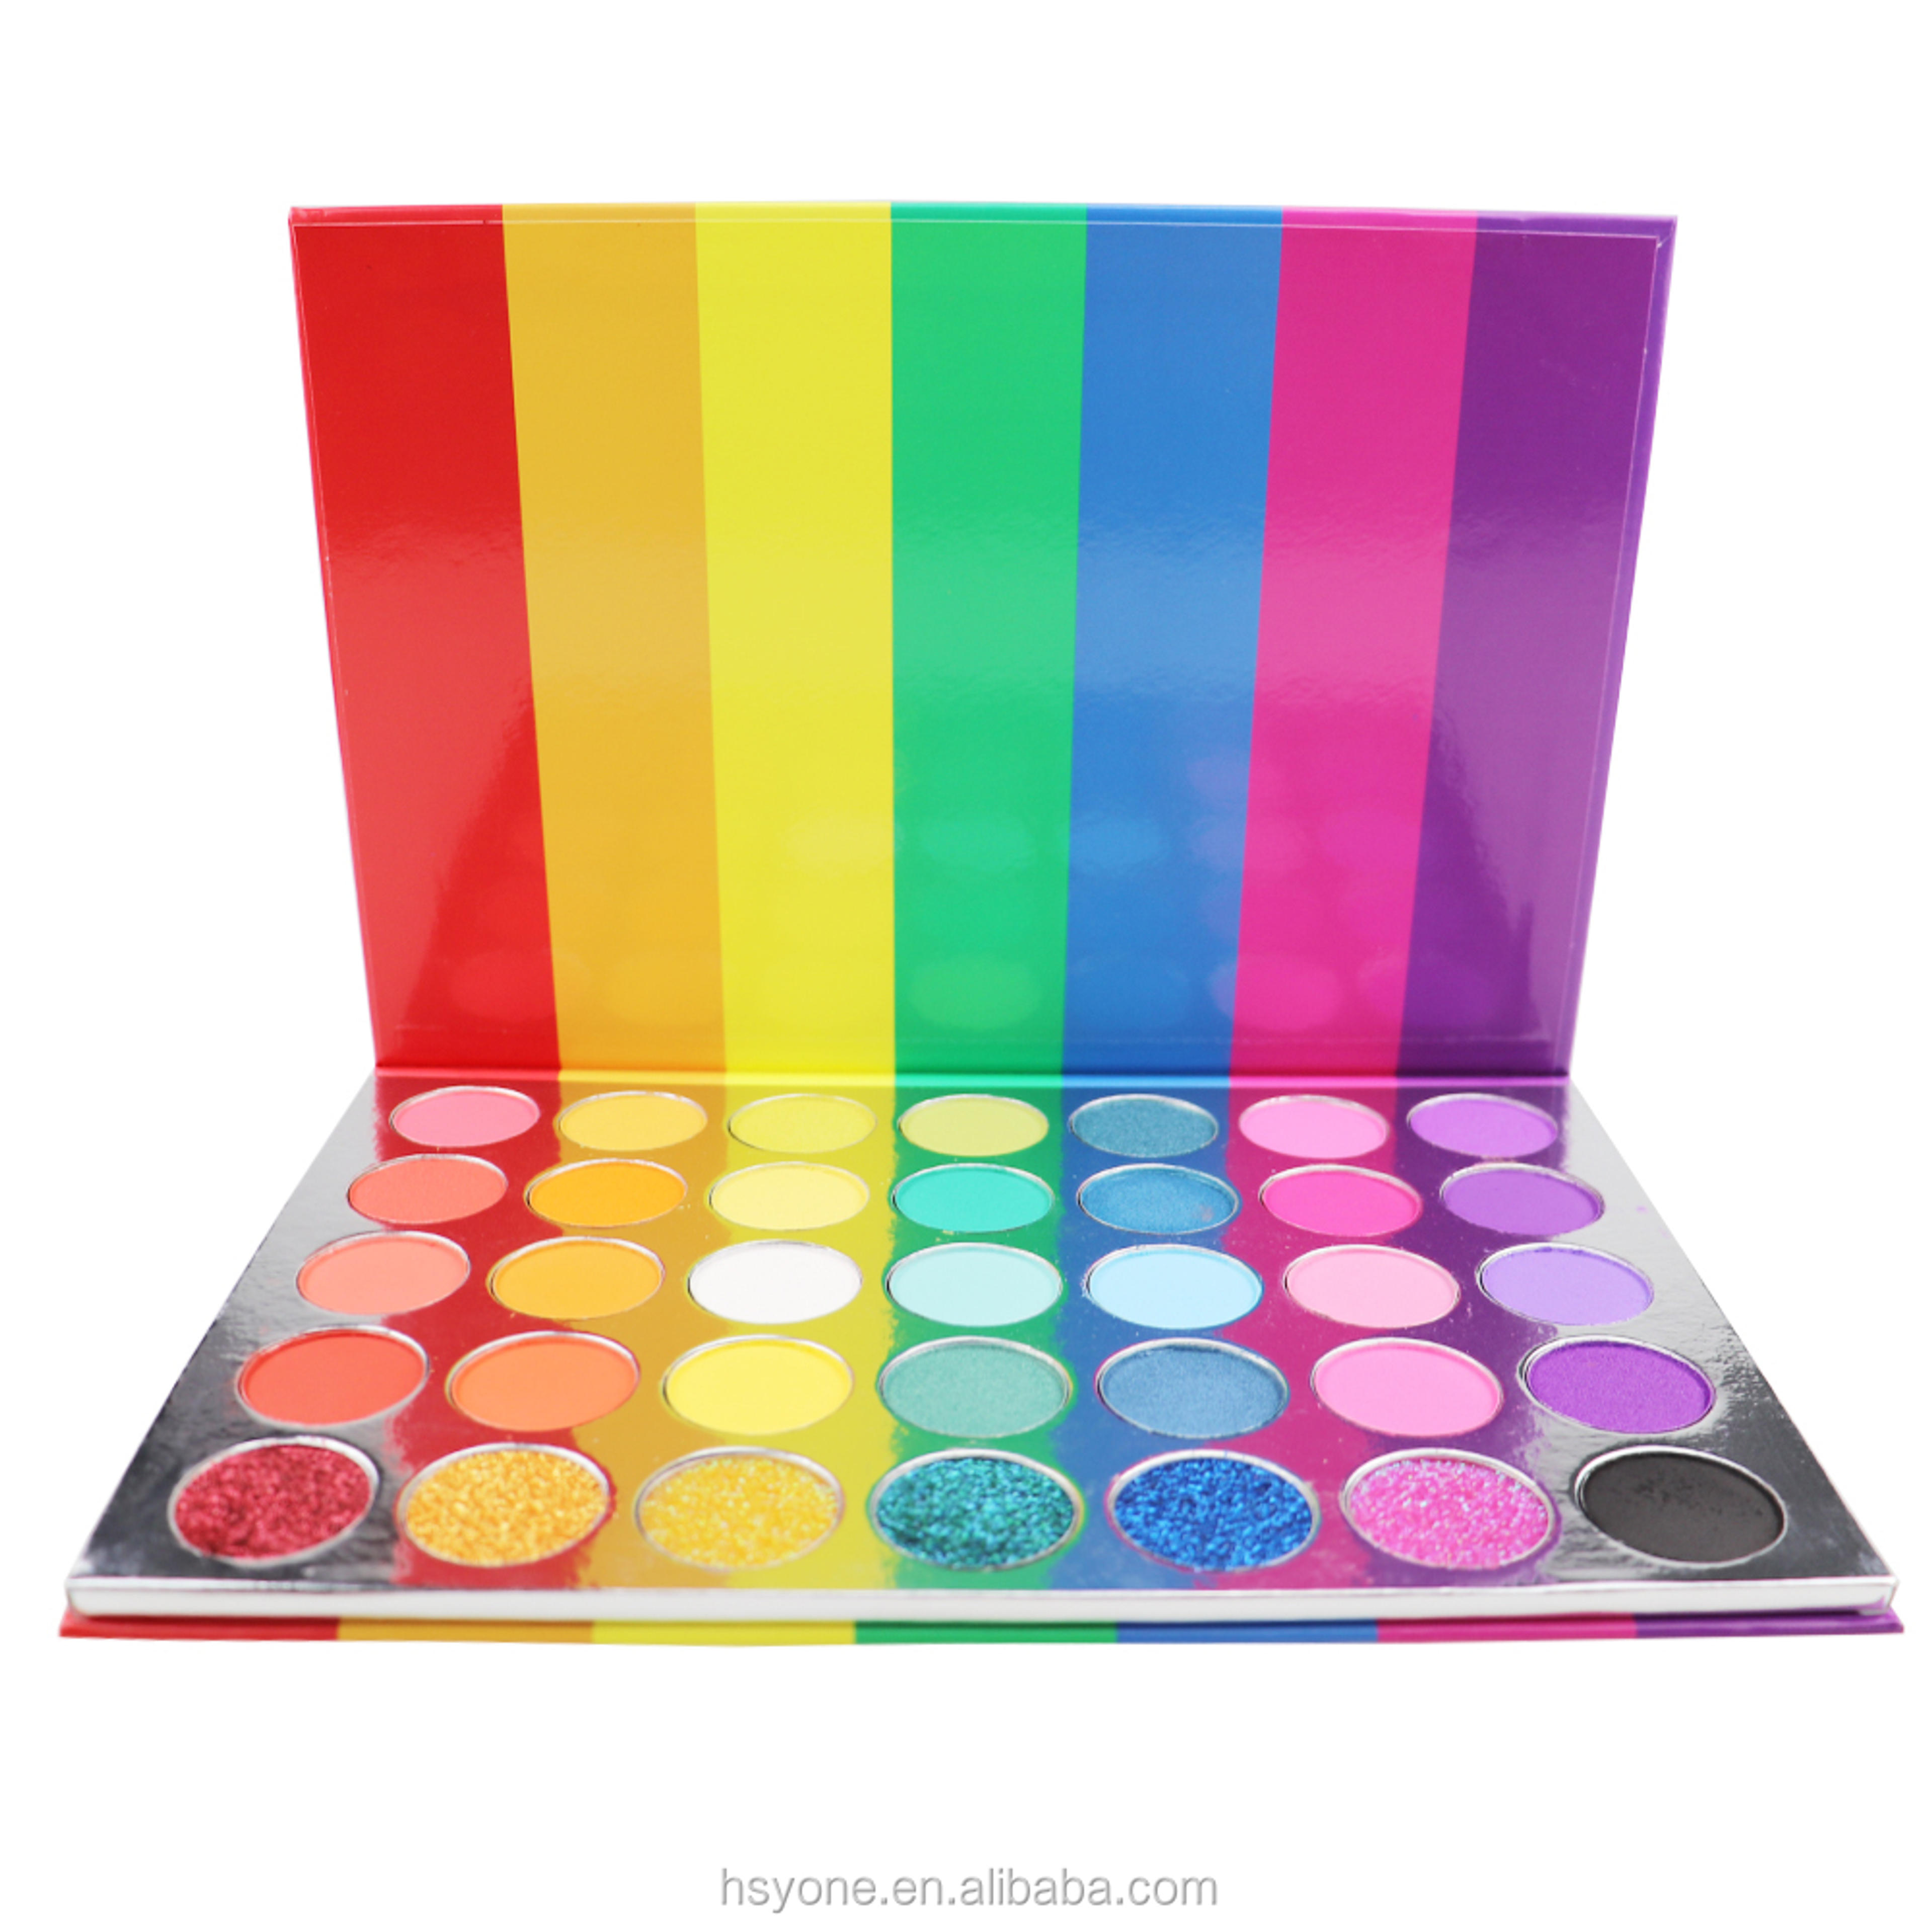 Fully stocked makeup 35 colors color matte eyeshadow palette powder private label glitter